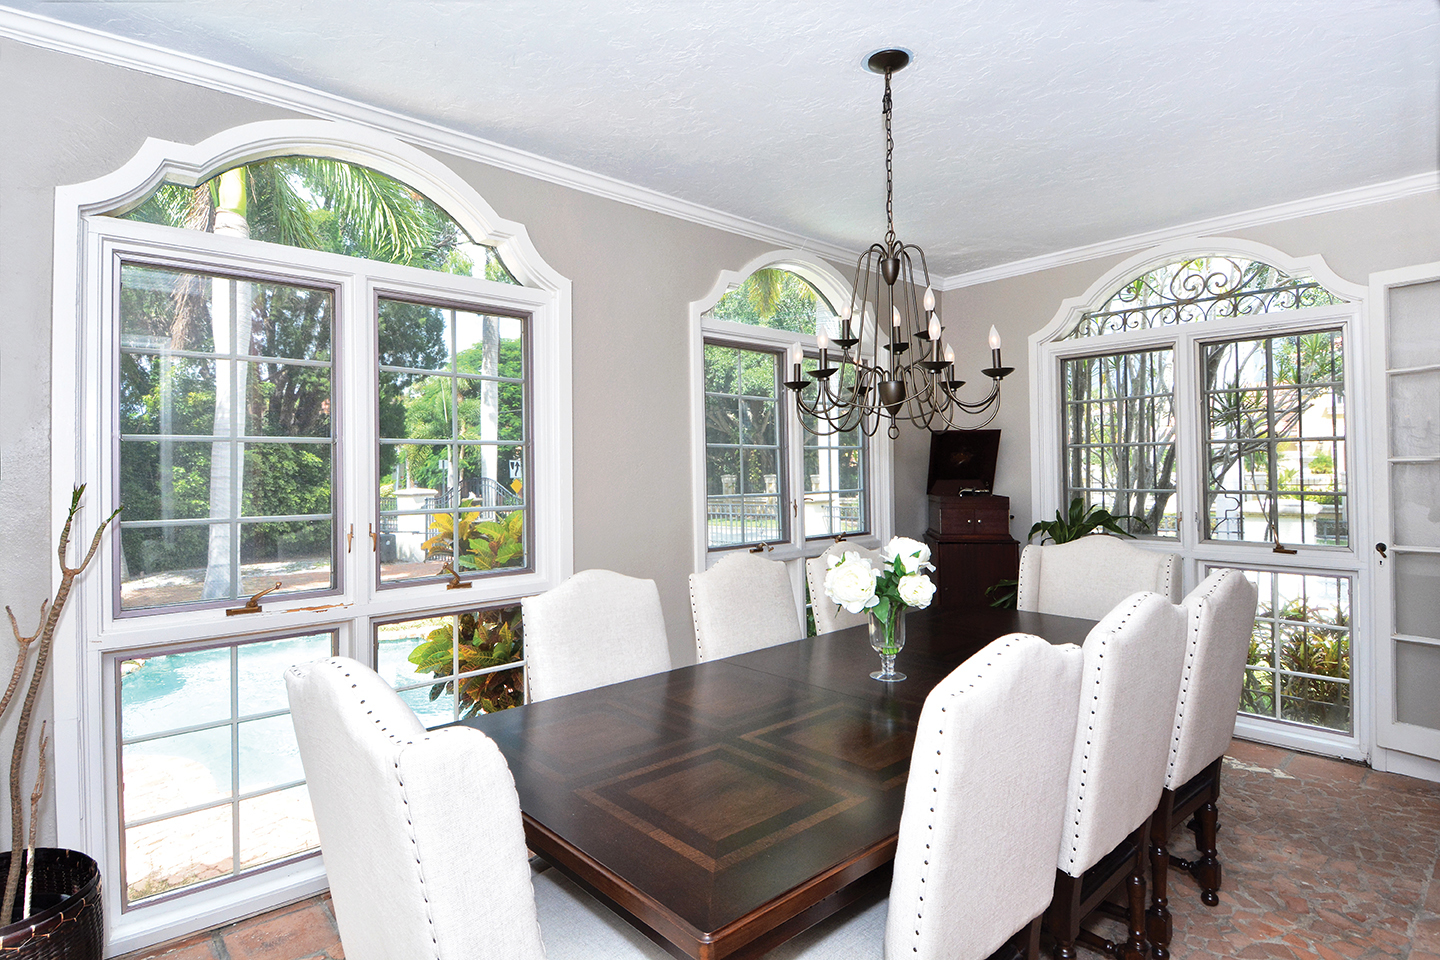 In the dining room, graceful windows overlook the paver patio. The floors are an unusual treatment of broken brick.